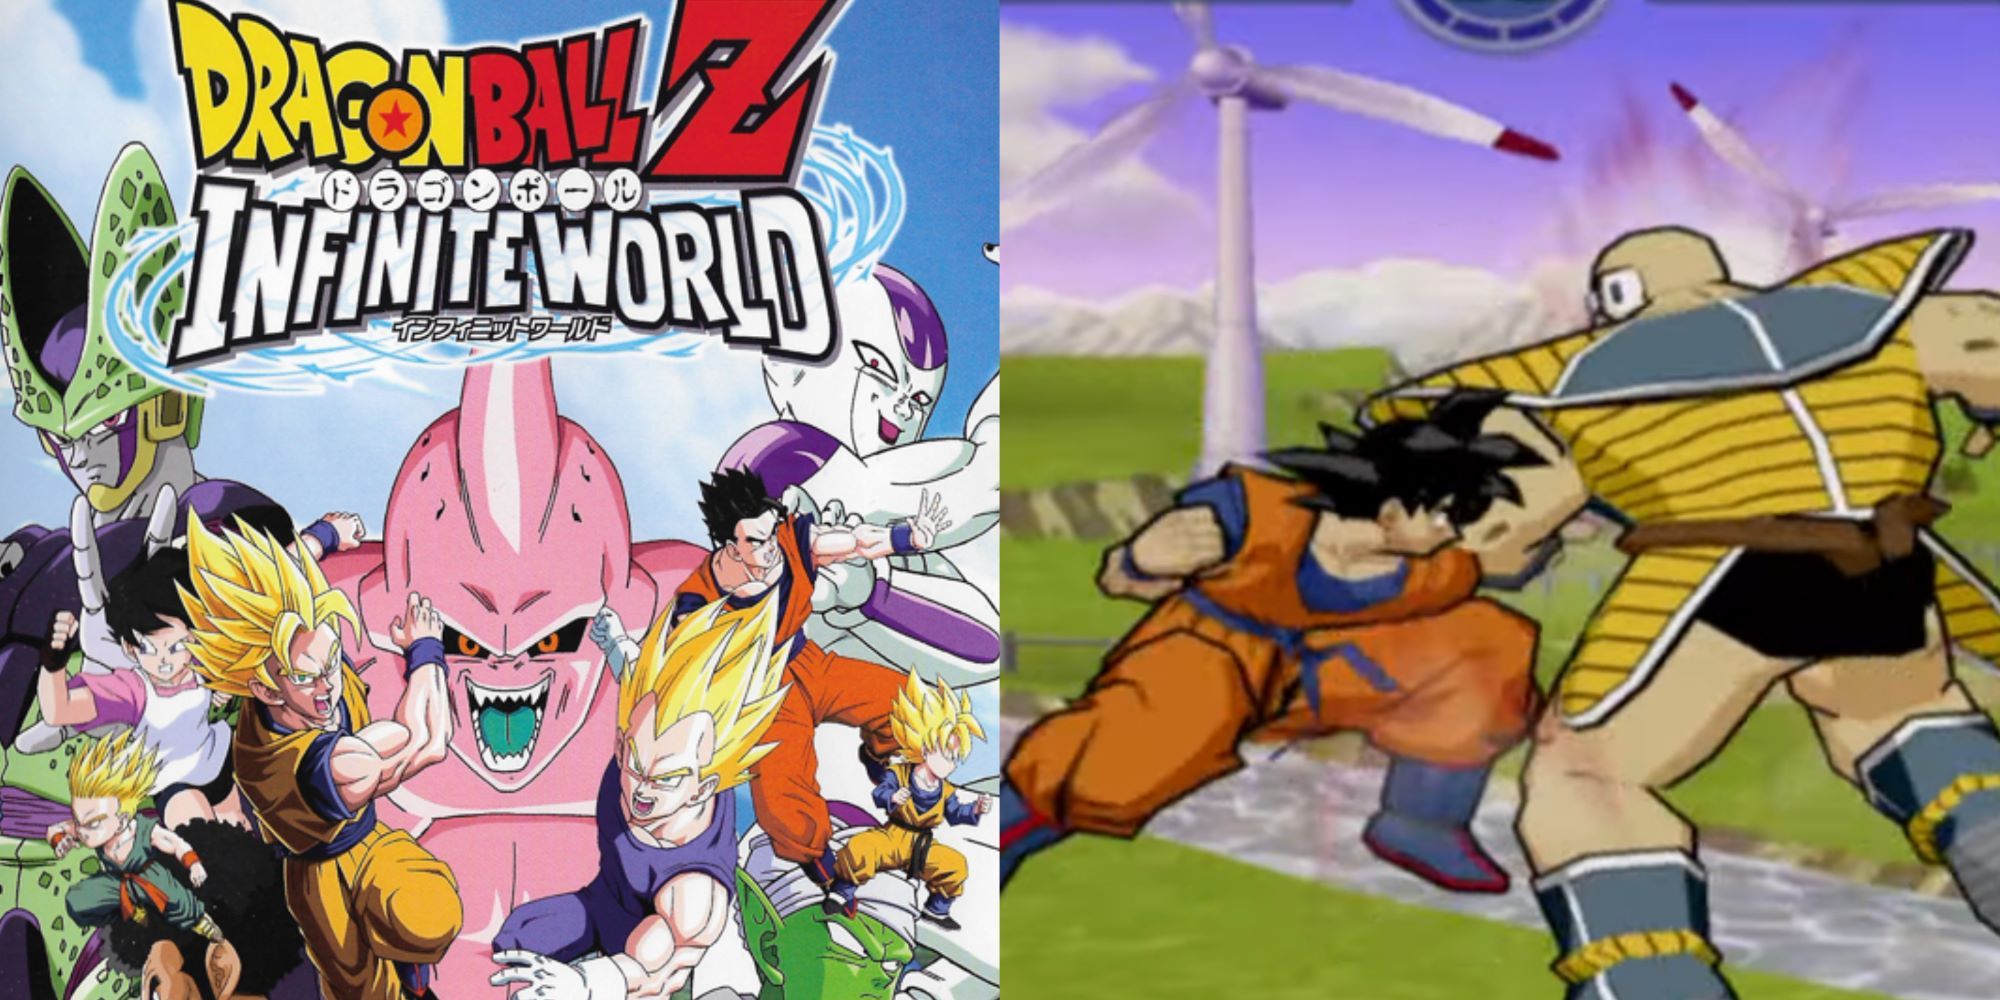 dbz infinite world coverwith heroes and villaiins and goku fighting nappa gameplay